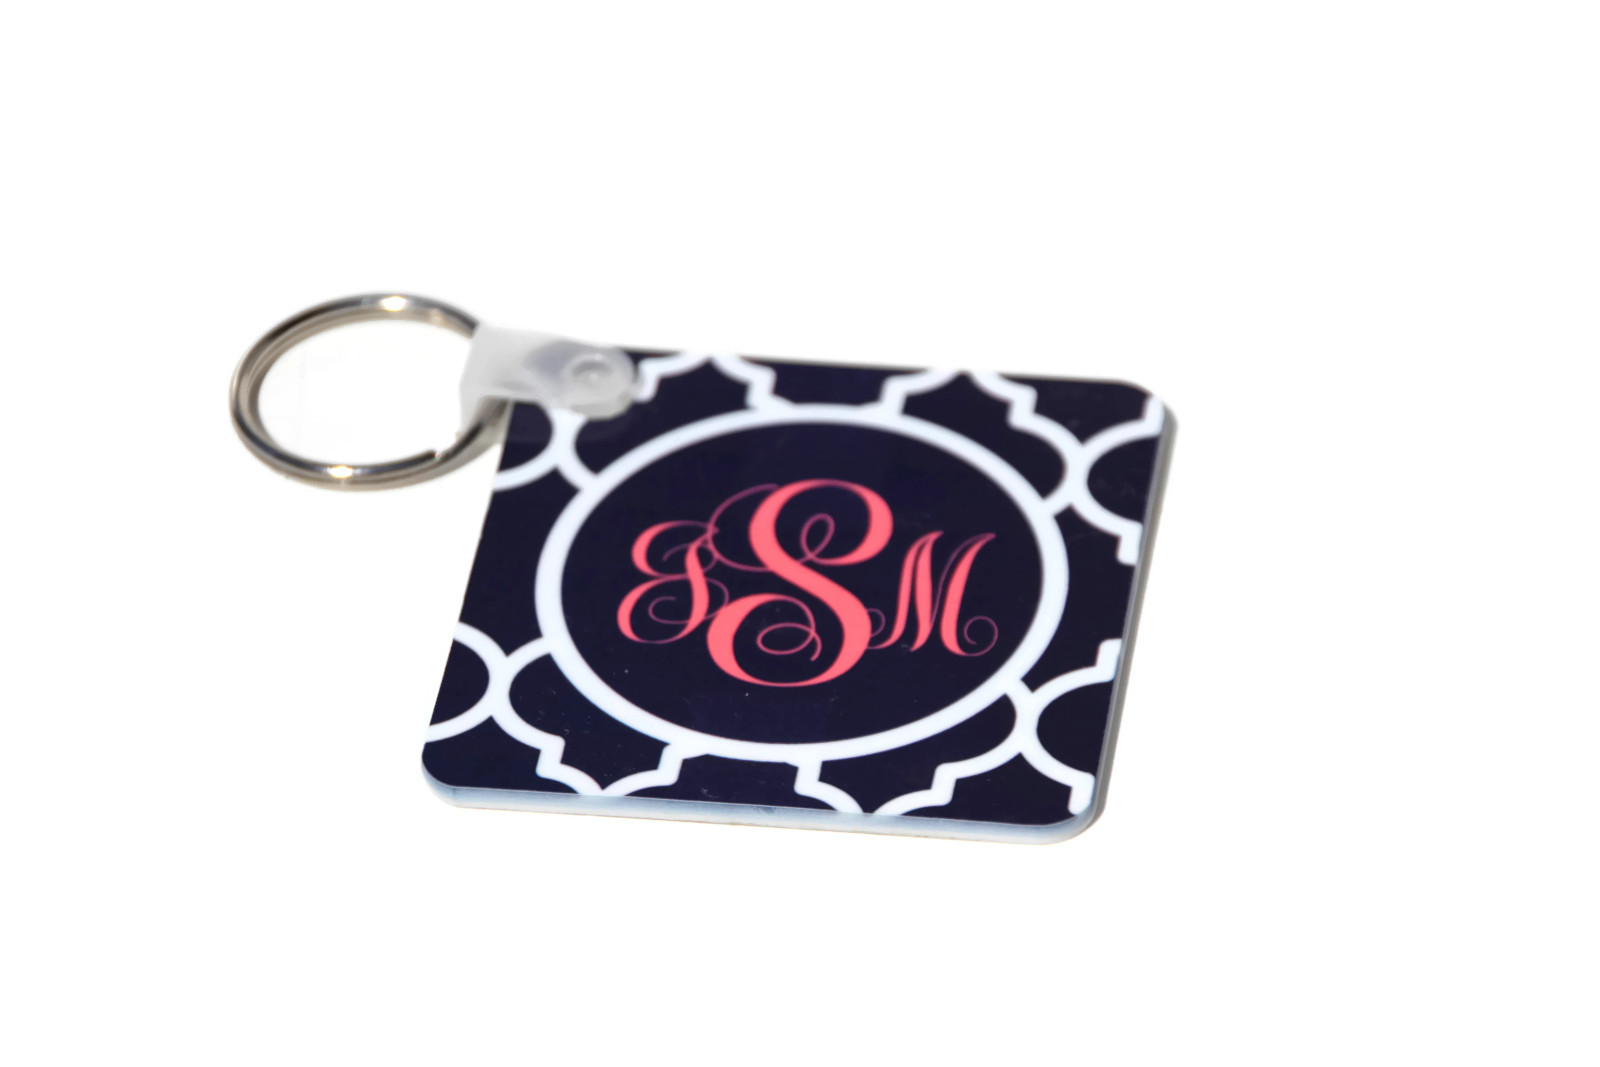 Monogrammed Key Chain made with sublimation printing